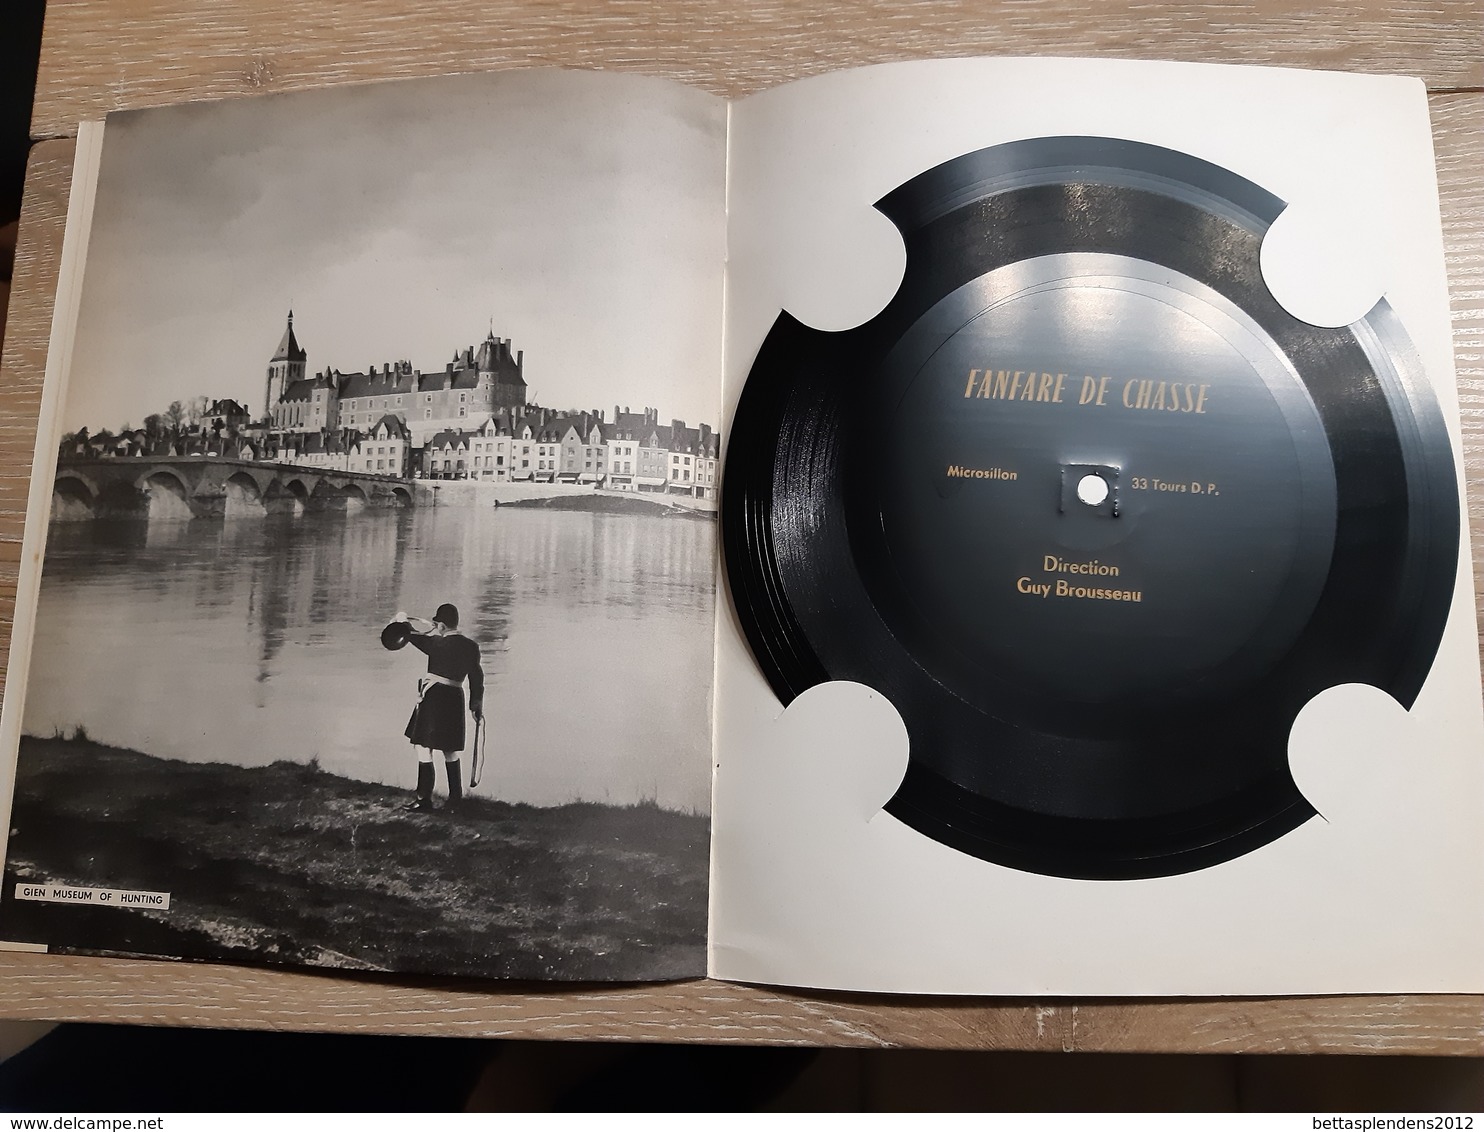 CHASSE - CHAMBORD HUNT CLUB - HUNTING IN FRANCE - COMPLET 12 PAGES ET DISQUE MOU "Fanfare De Chasse" - Altri & Non Classificati